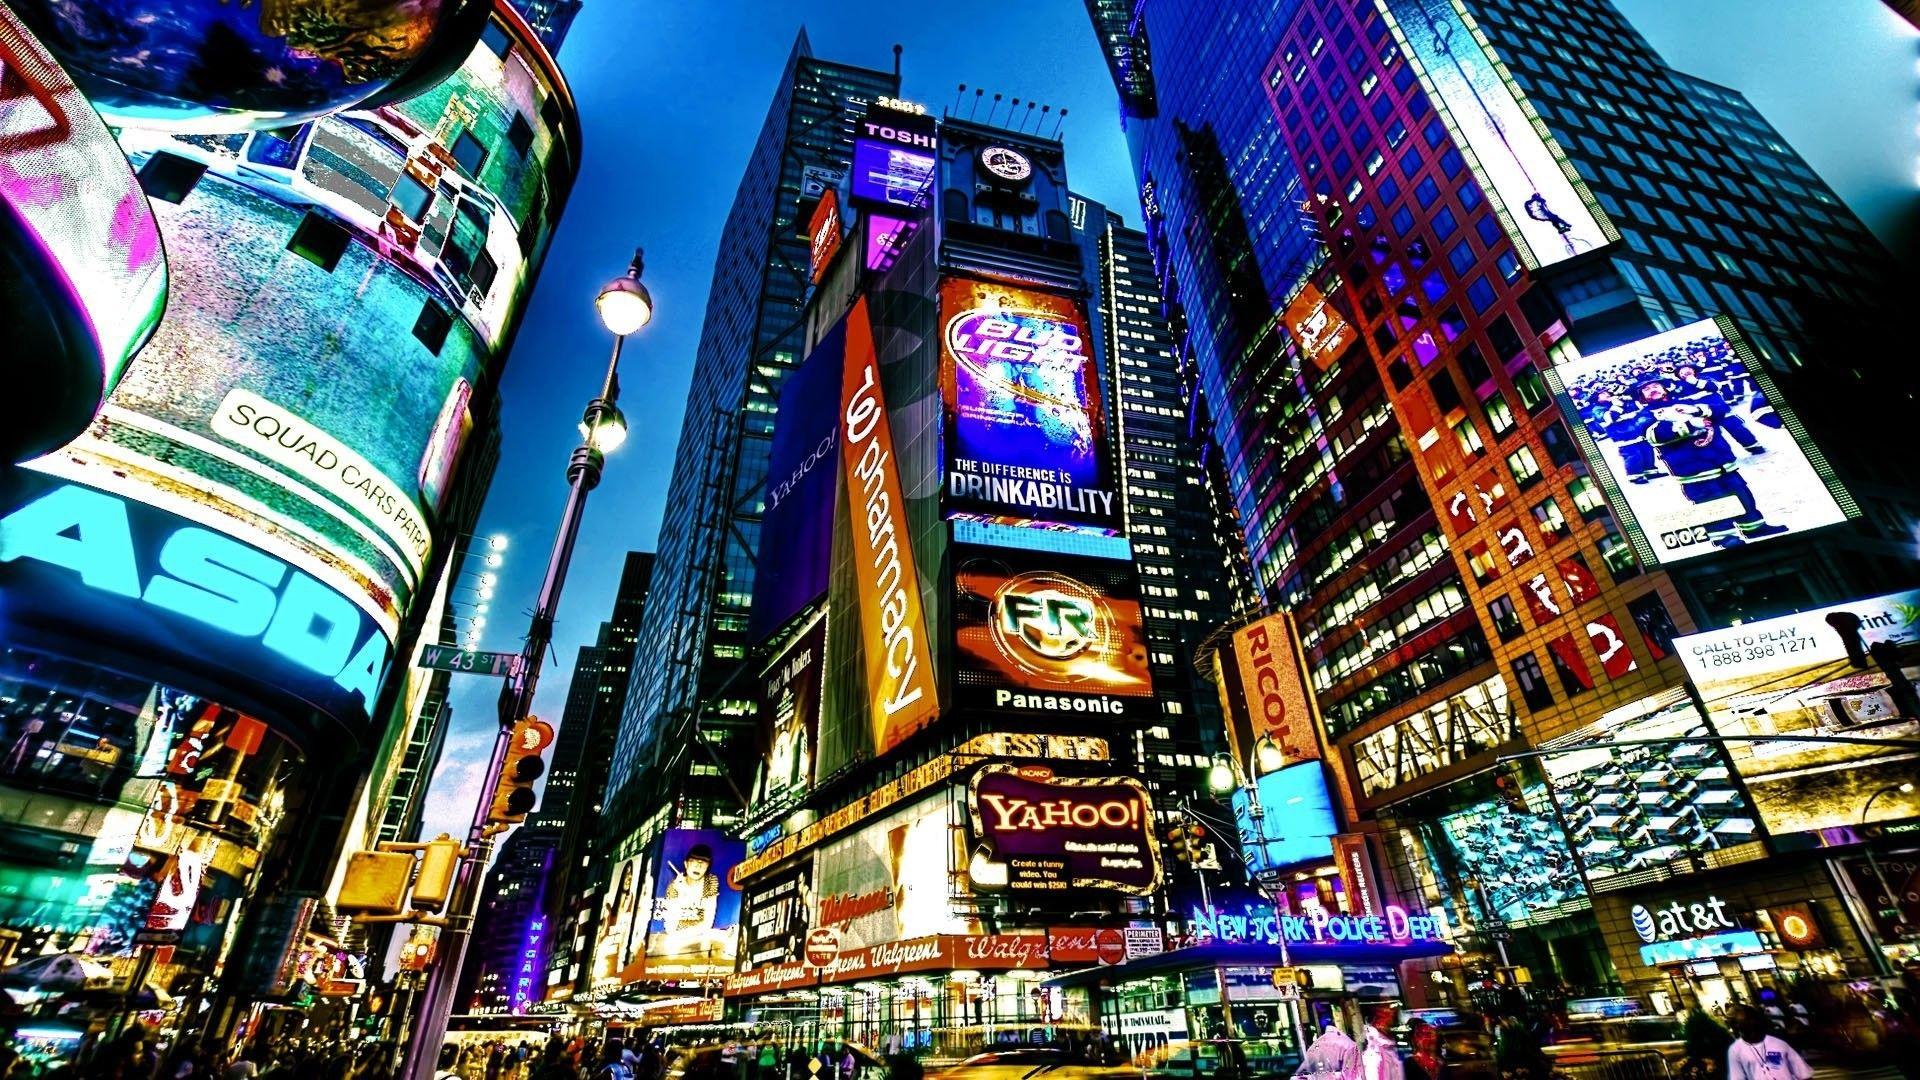 Times Square Hd Wallpapers - Top Free Times Square Hd Backgrounds